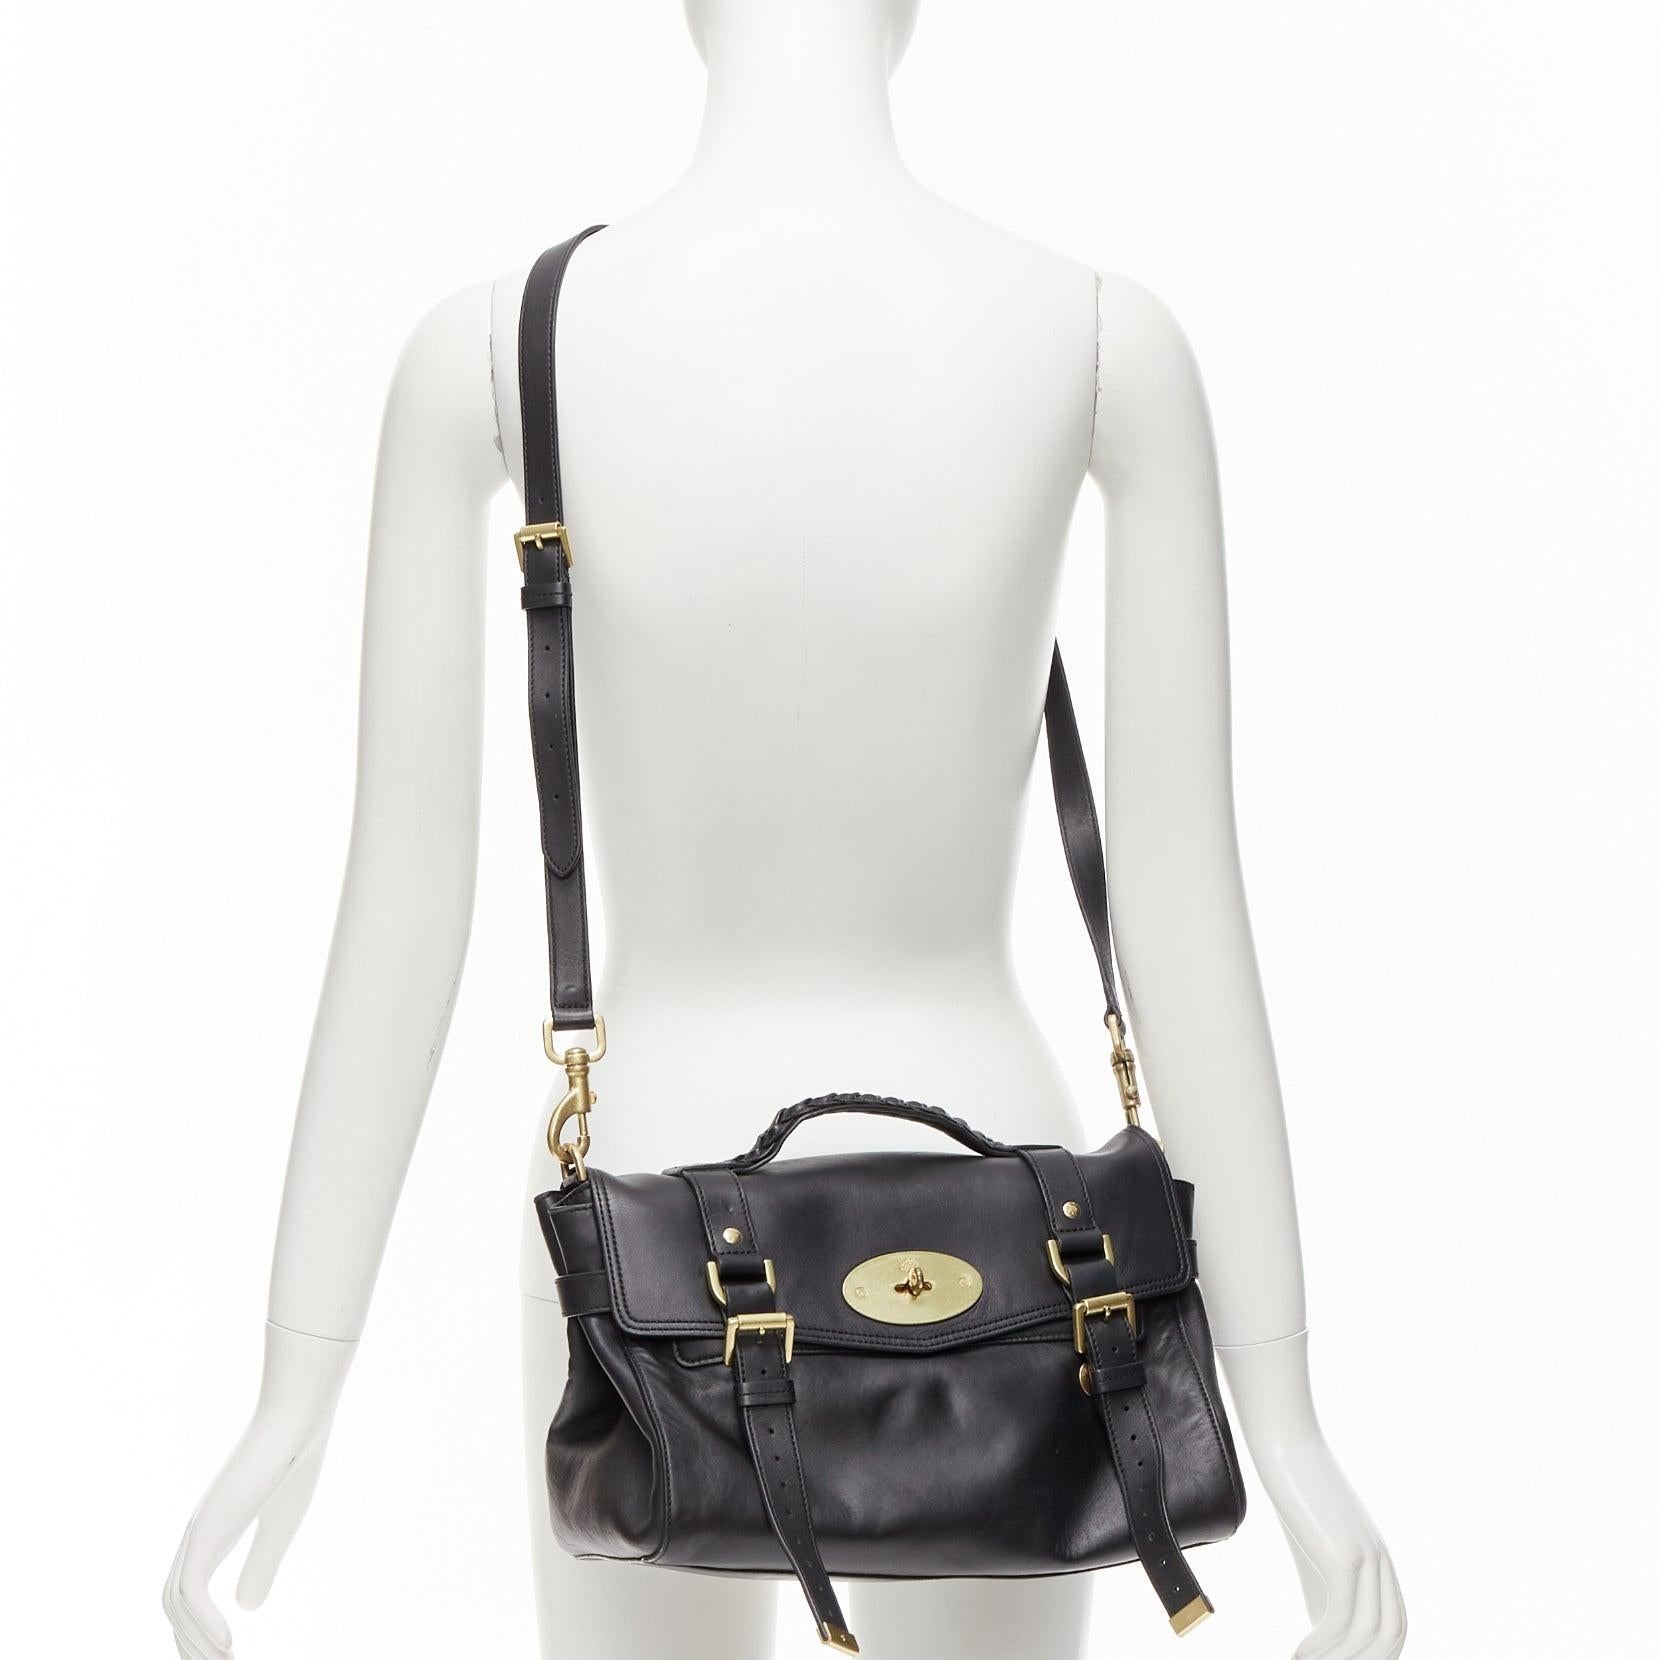 MULBERRY Alexa black calfskin gold vintage buckle straps satchel crossbody bag
Reference: TGAS/D01102
Brand: Mulberry
Model: Alexa
Material: Leather
Color: Black, Gold
Pattern: Solid
Closure: Turnlock
Lining: Black Leather
Extra Details: